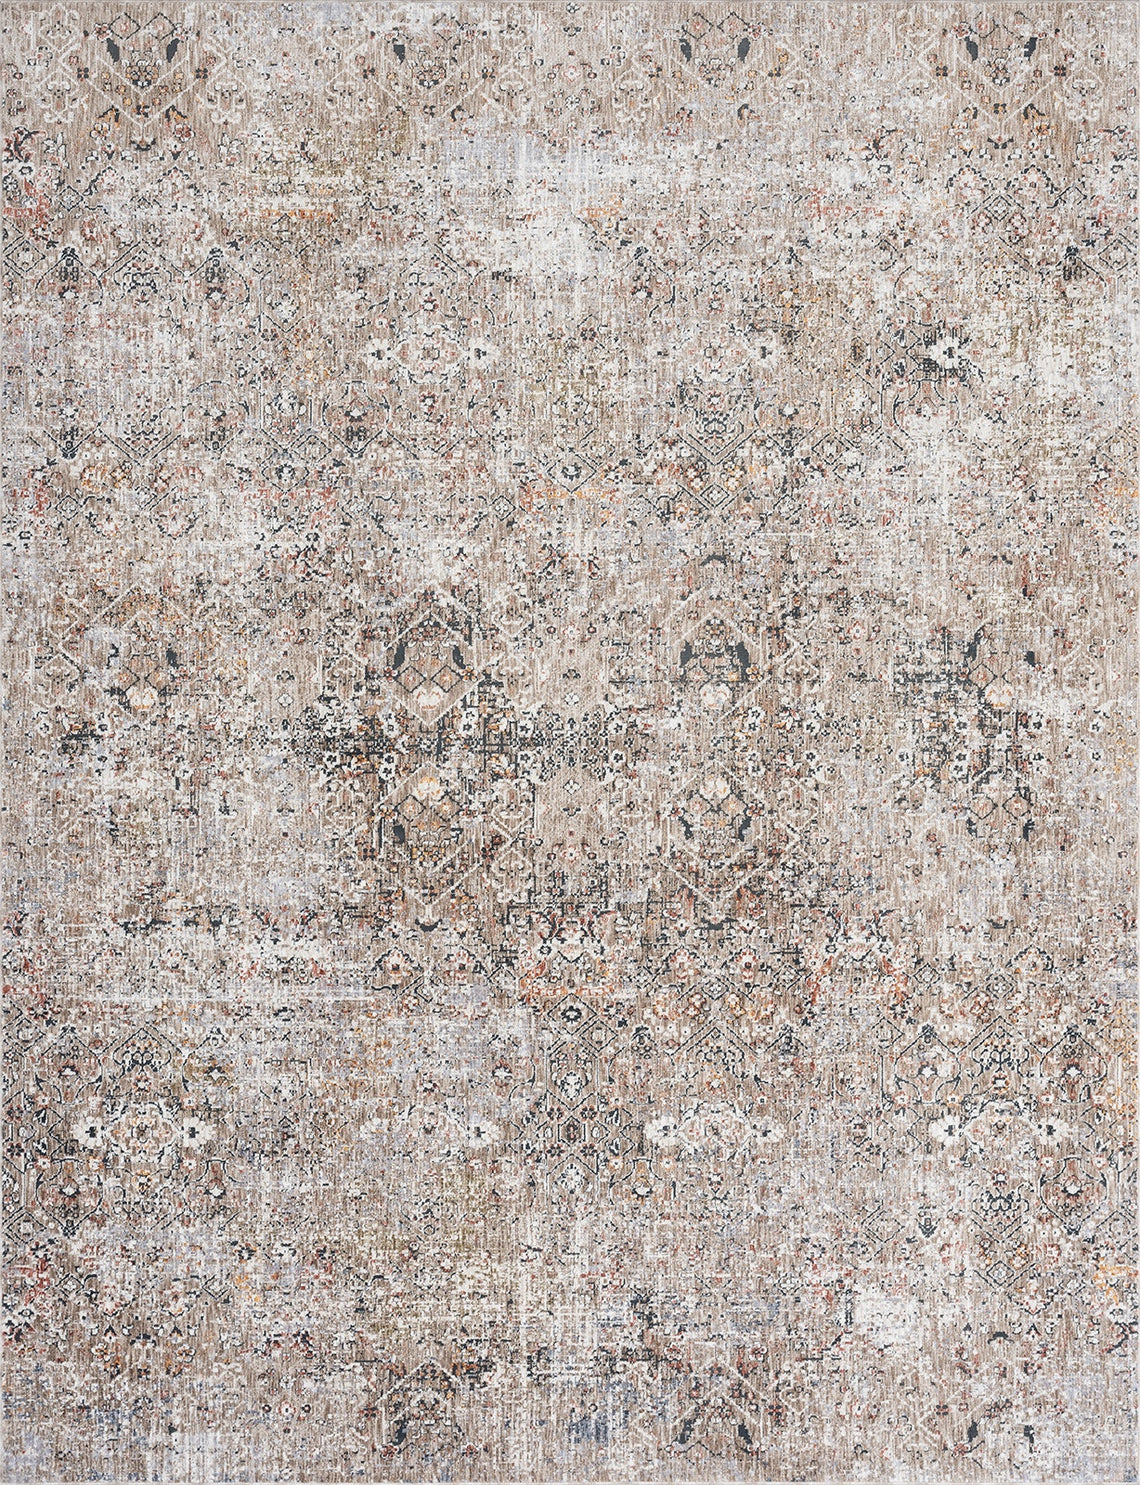 Sonoma Earth Tones/Pewter 5 ft. 6 in. X 8 ft. 6 in. Area Rug